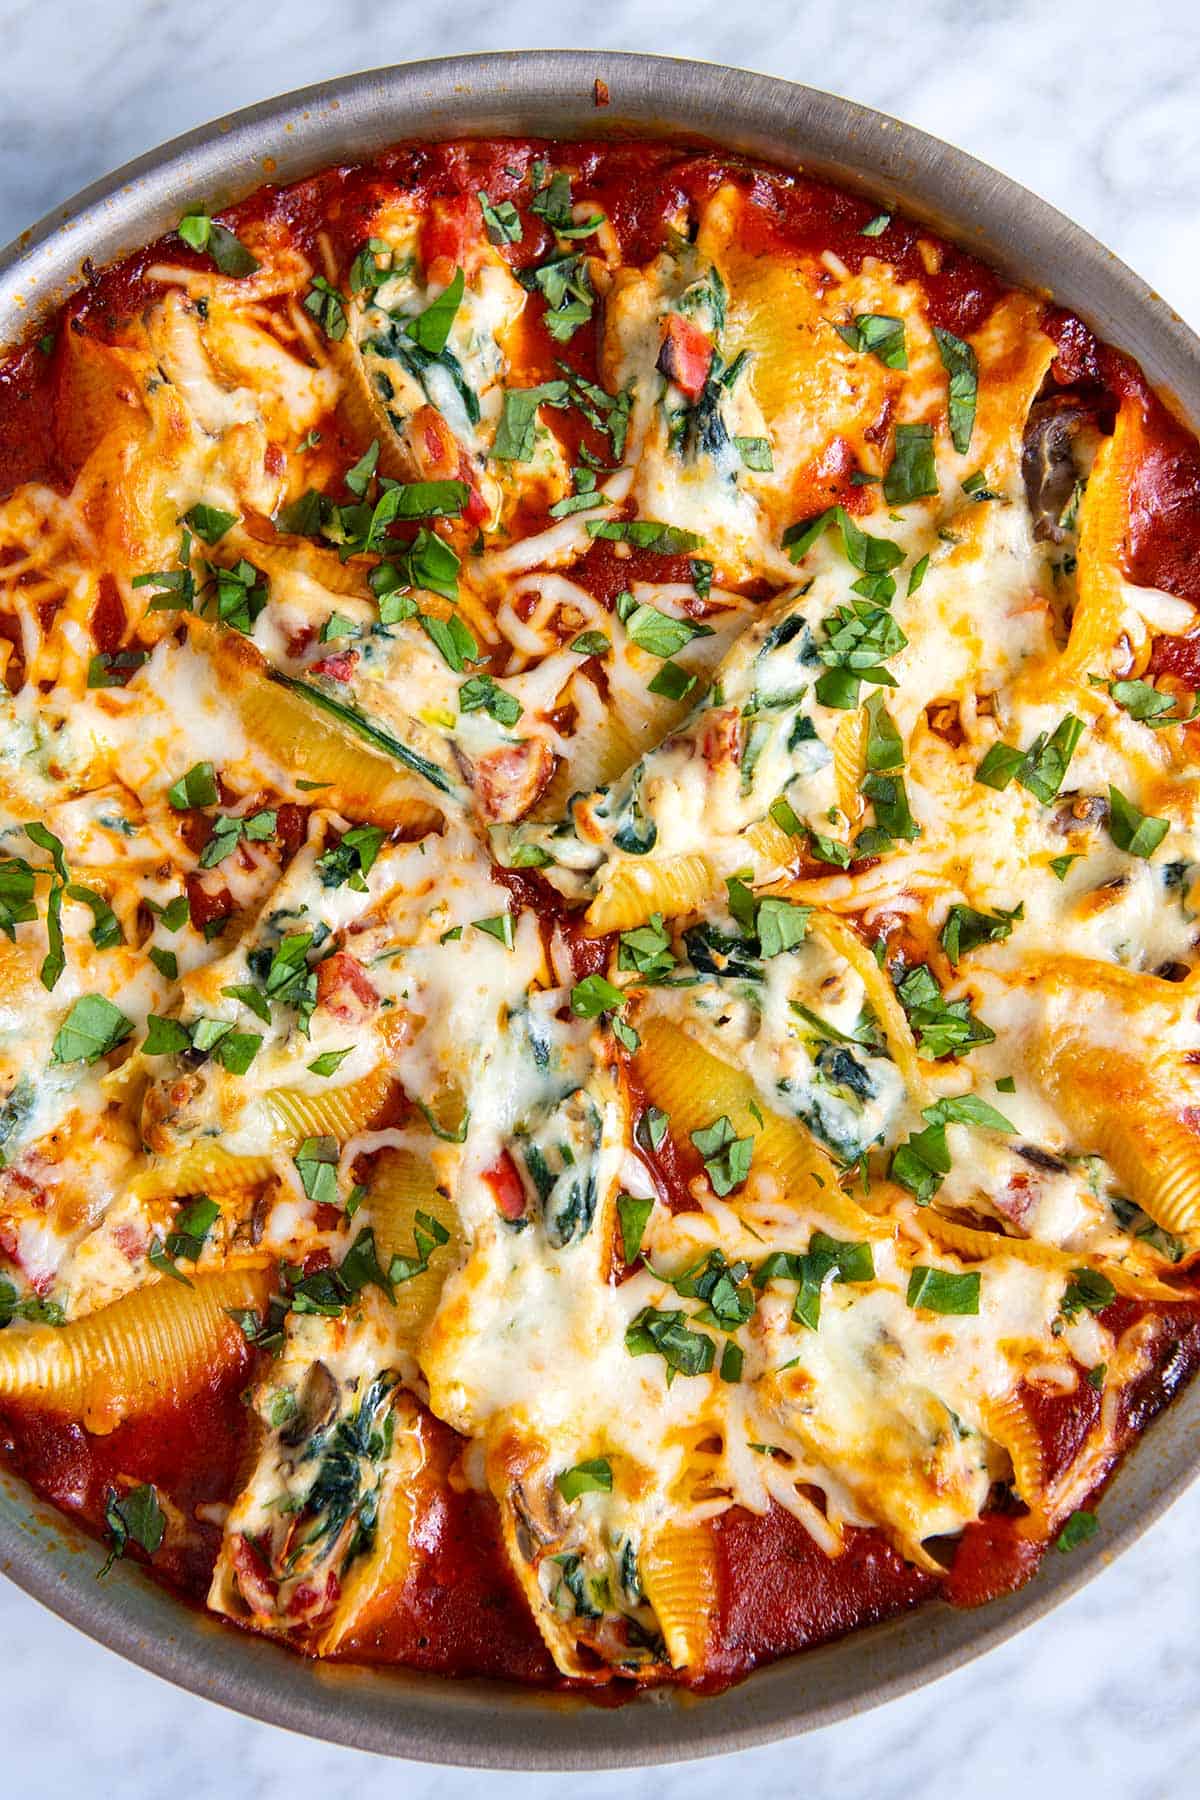 A skillet full of vegetable and cheese stuffed shells